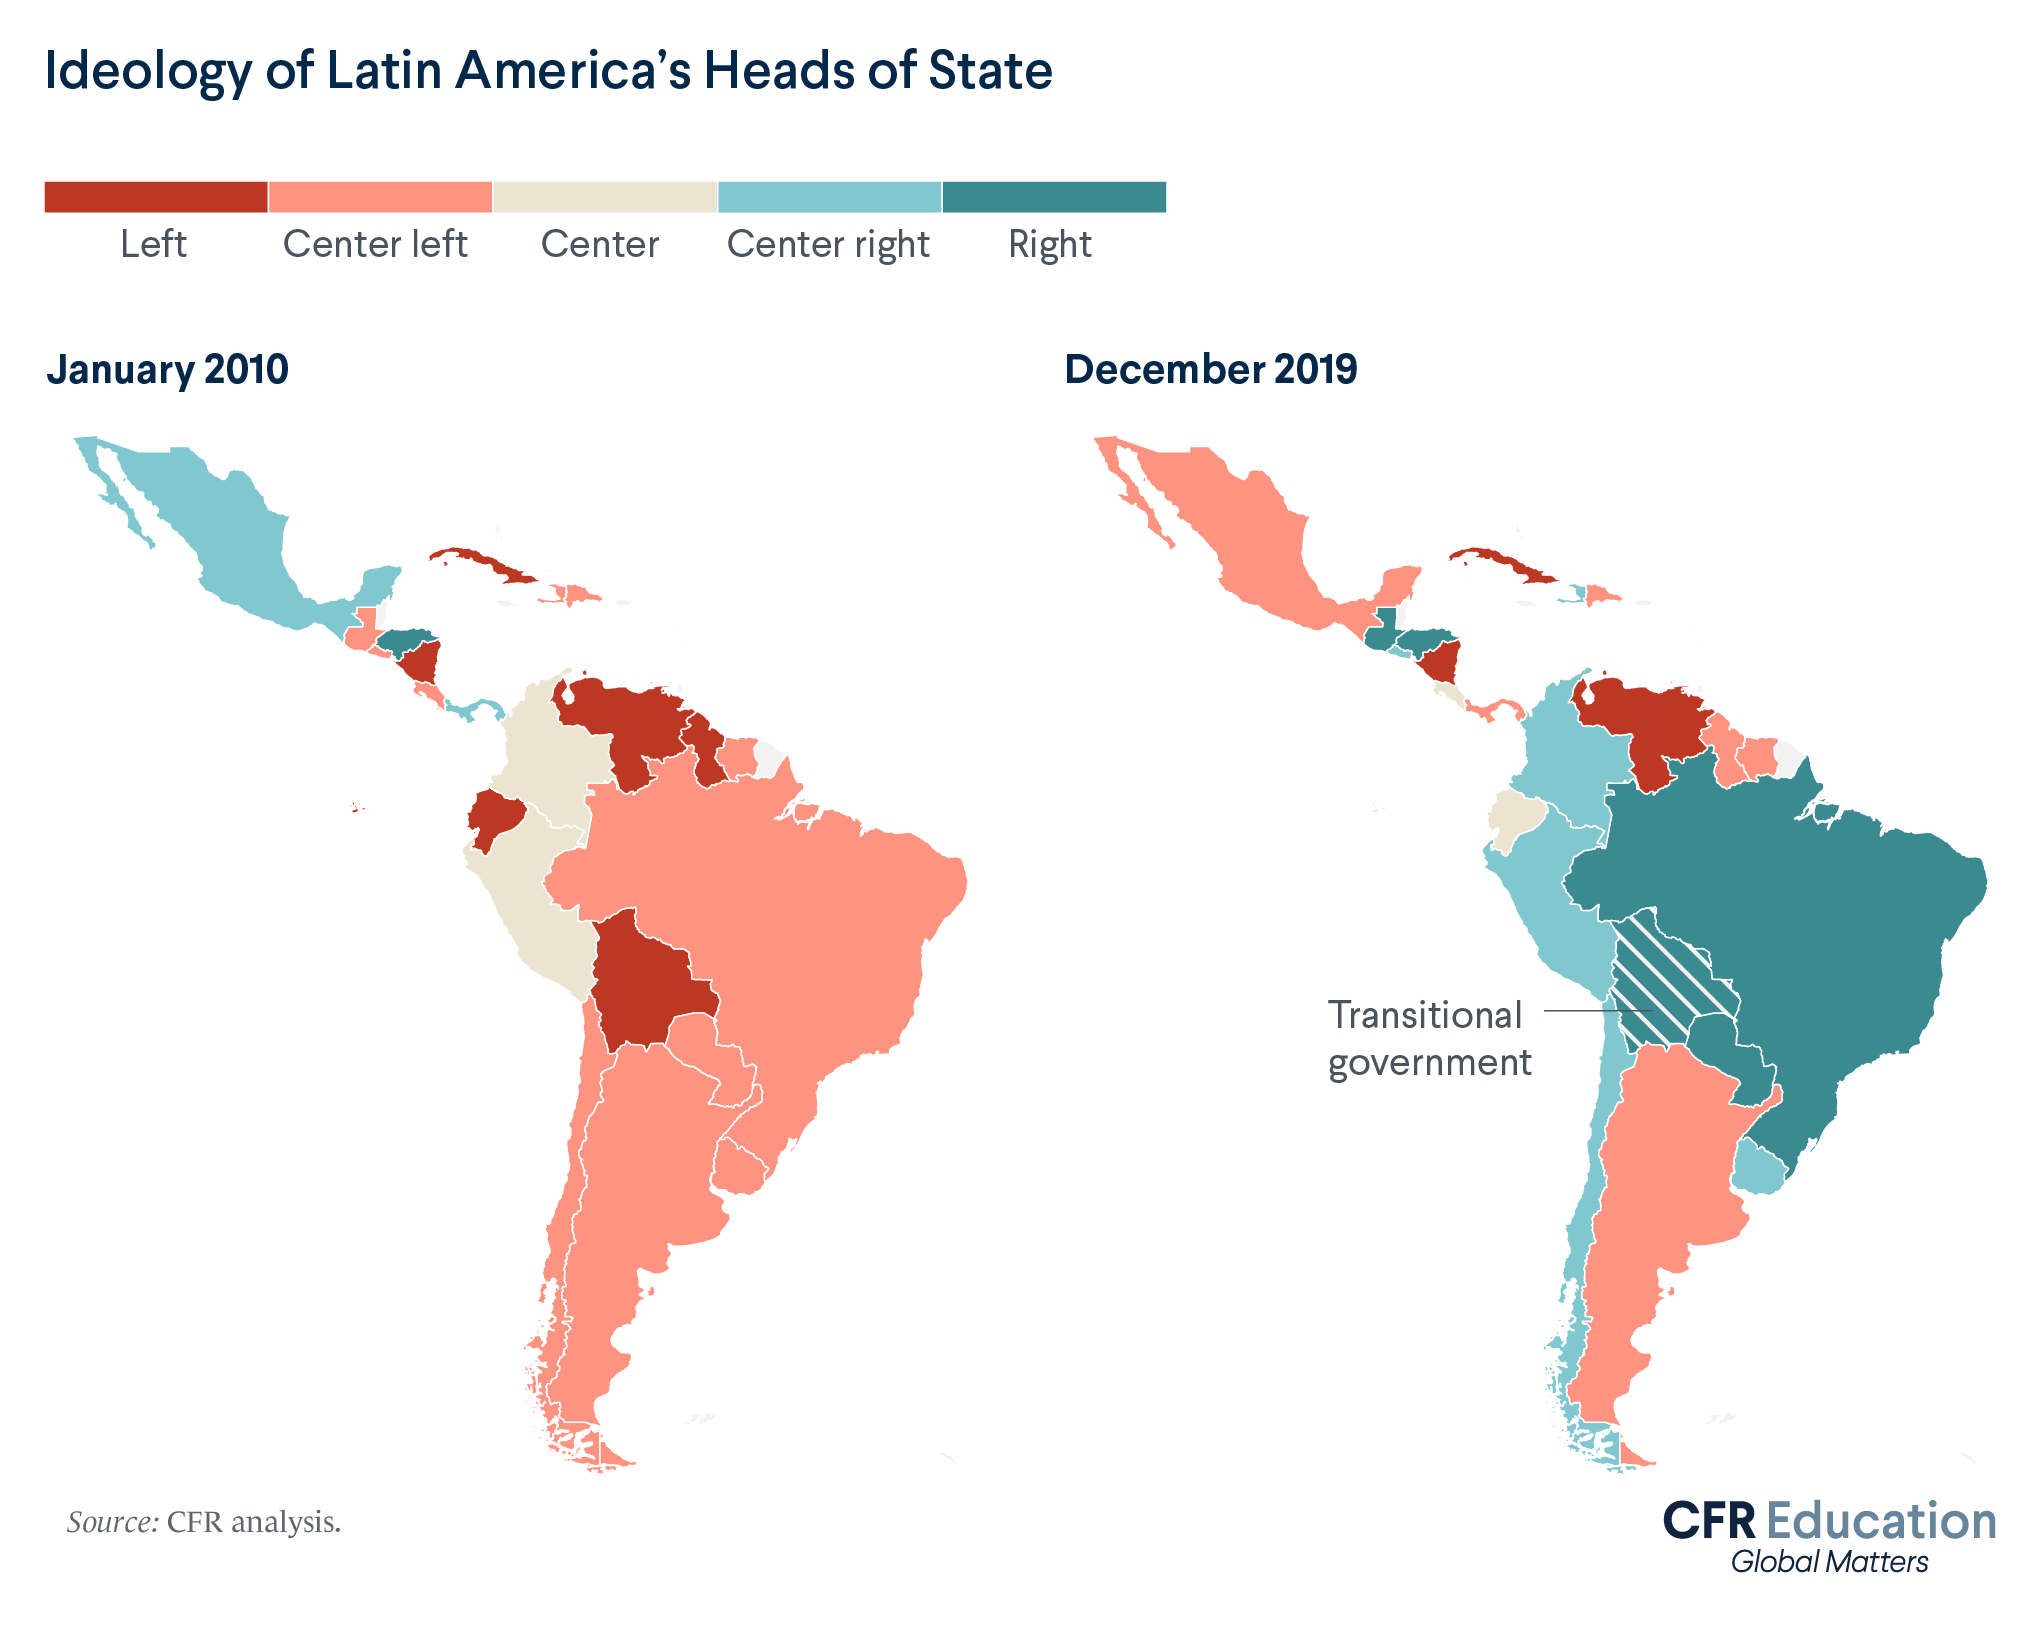 Maps showing the ideologies of Latin America's heads of states moving generally to the right between January 2010 and December 2019, according to CFR analysis. For more info contact us at cfr_education@cfr.org.